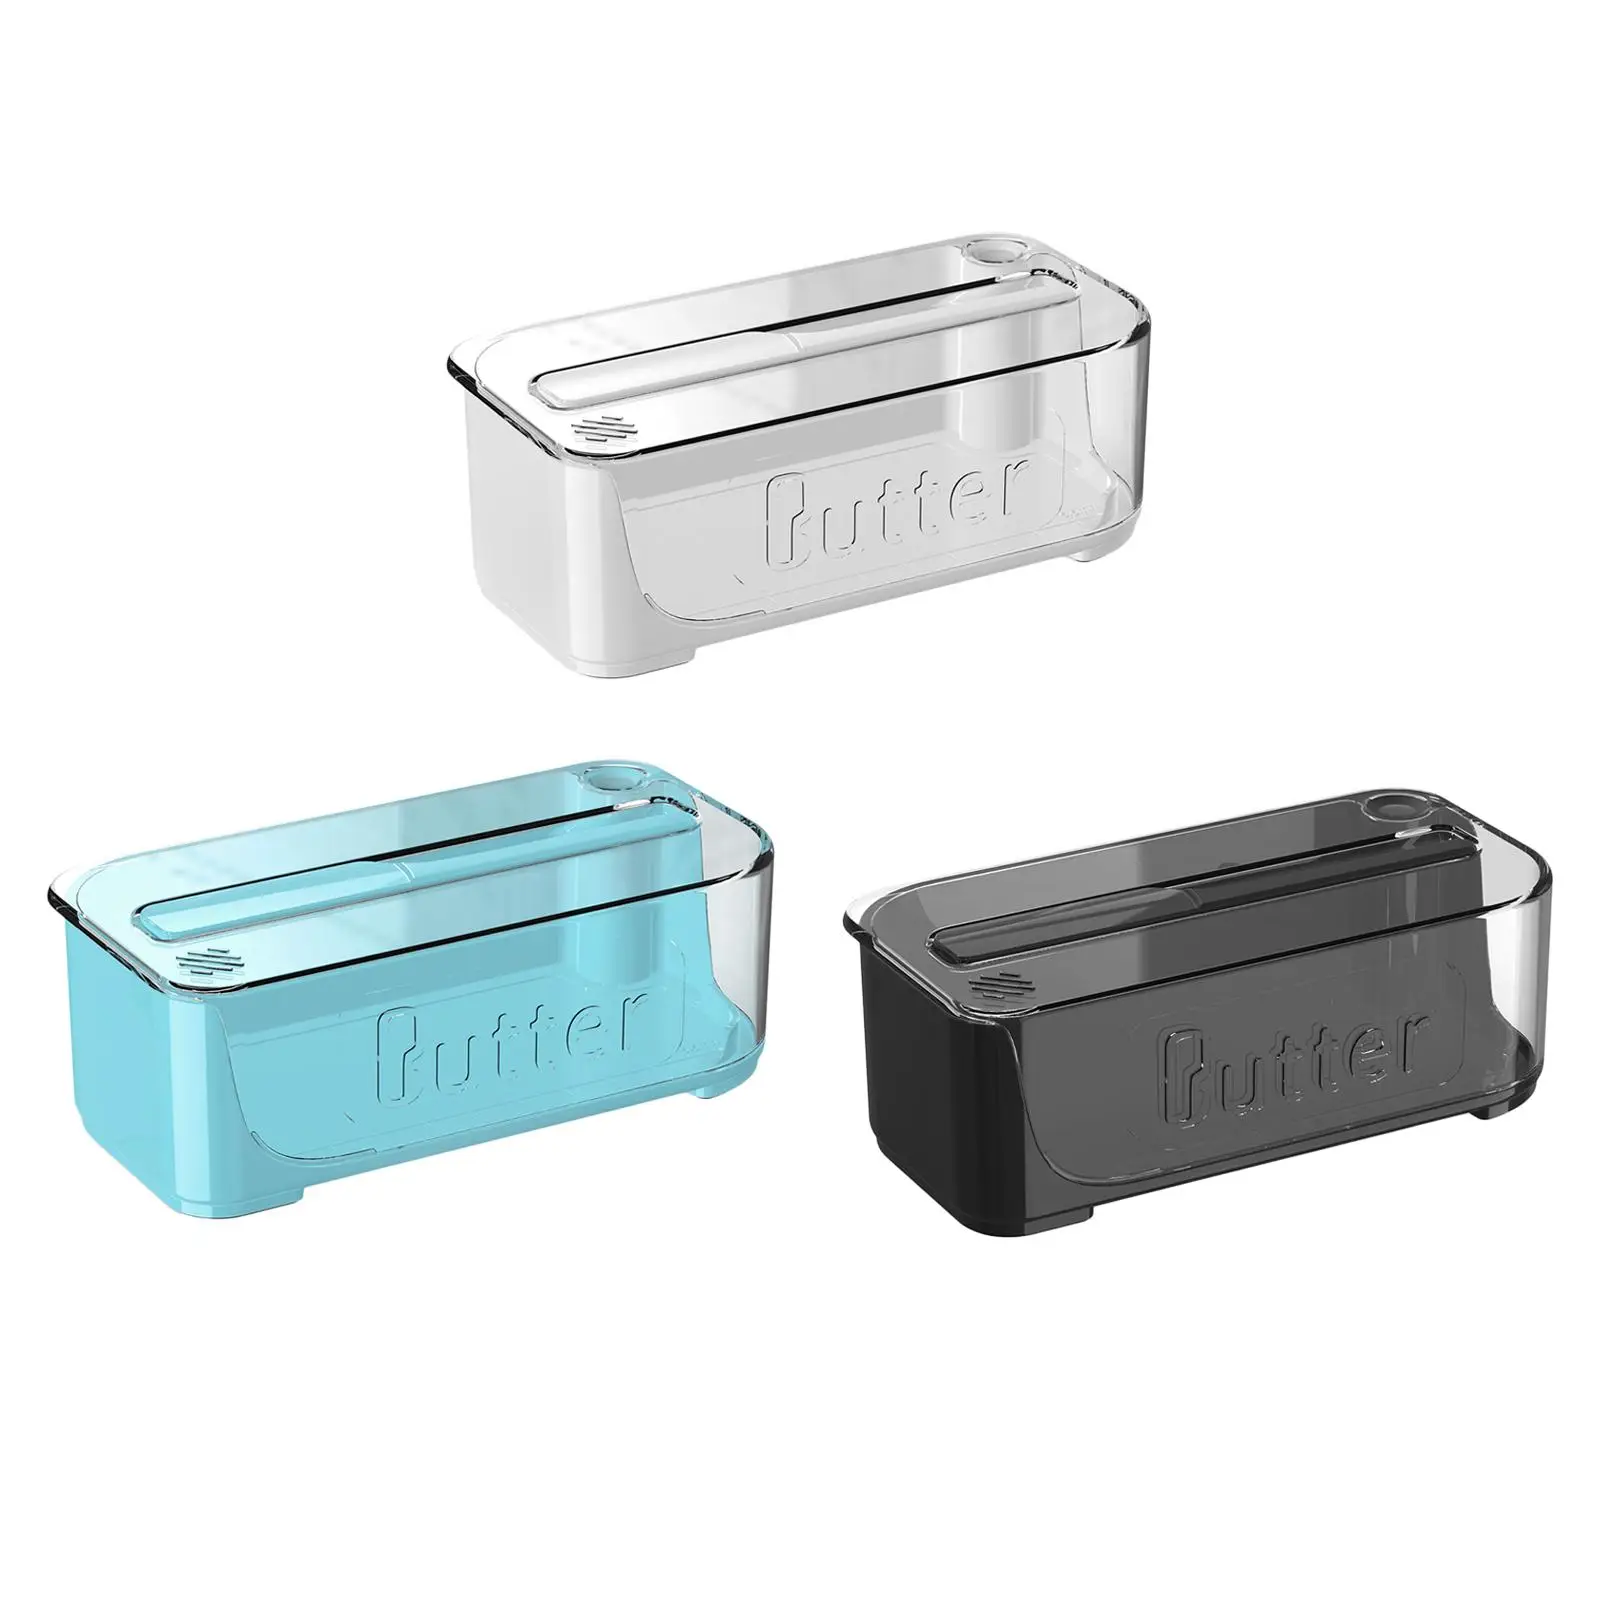 Rectangular Cheese Storage Keeper Preservation Container Food Storage Container